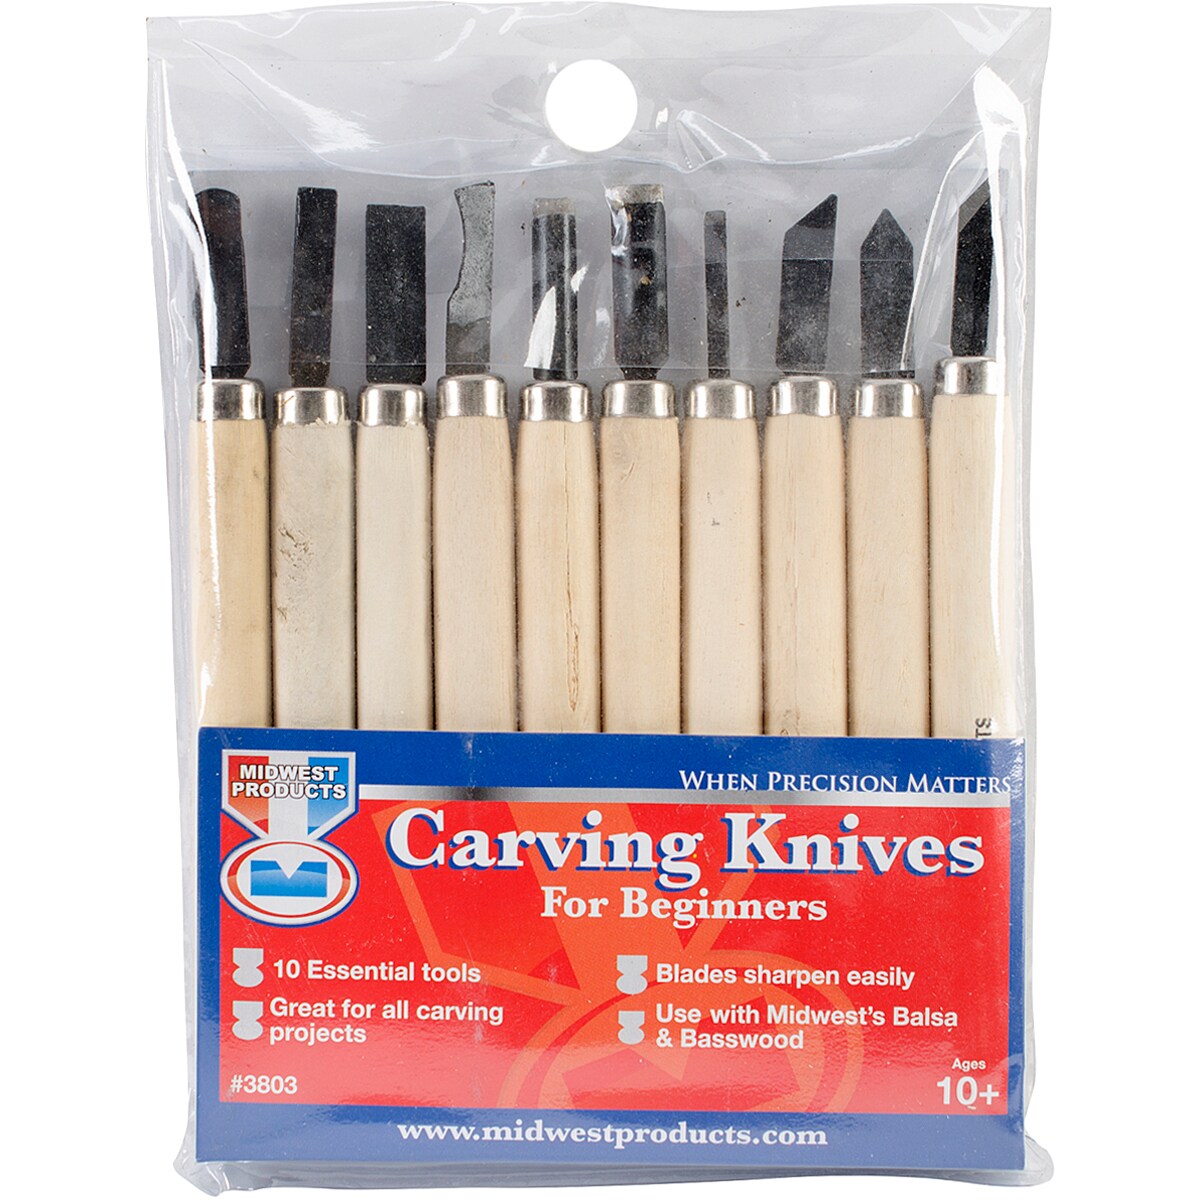 Carving knives, wood carving knives, set of 10 craft carving